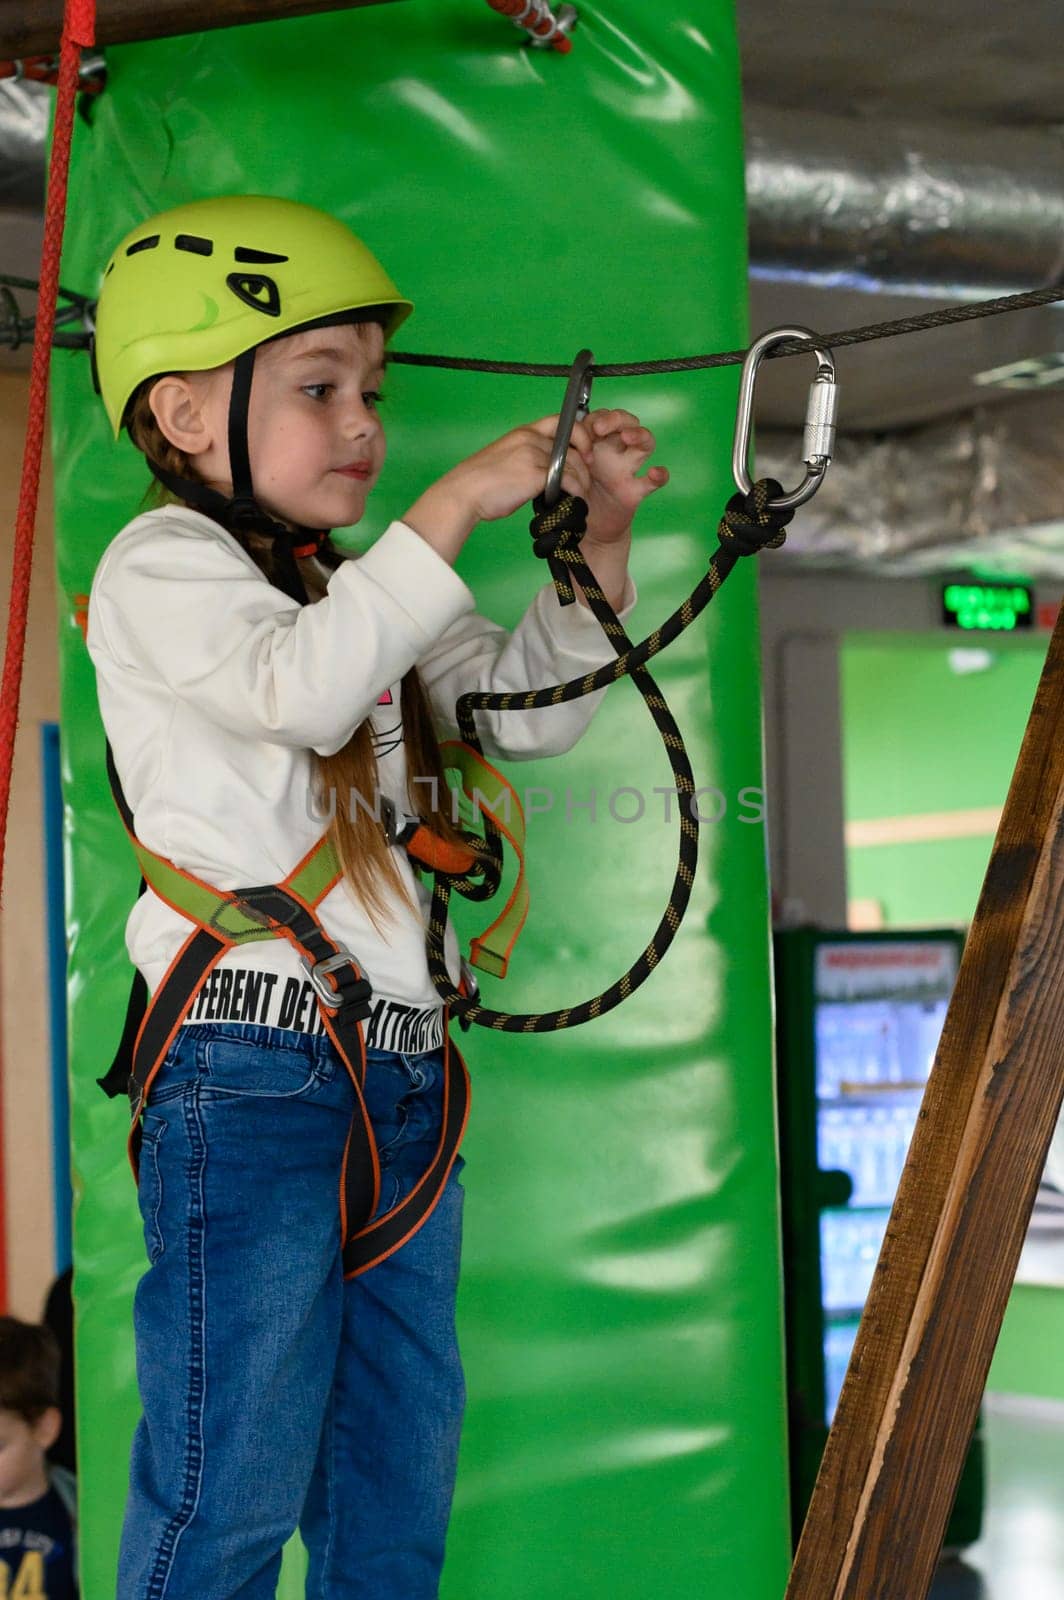 A little girl refastens a carabiner to another cable to go through another section of the cableway, active recreation for children.